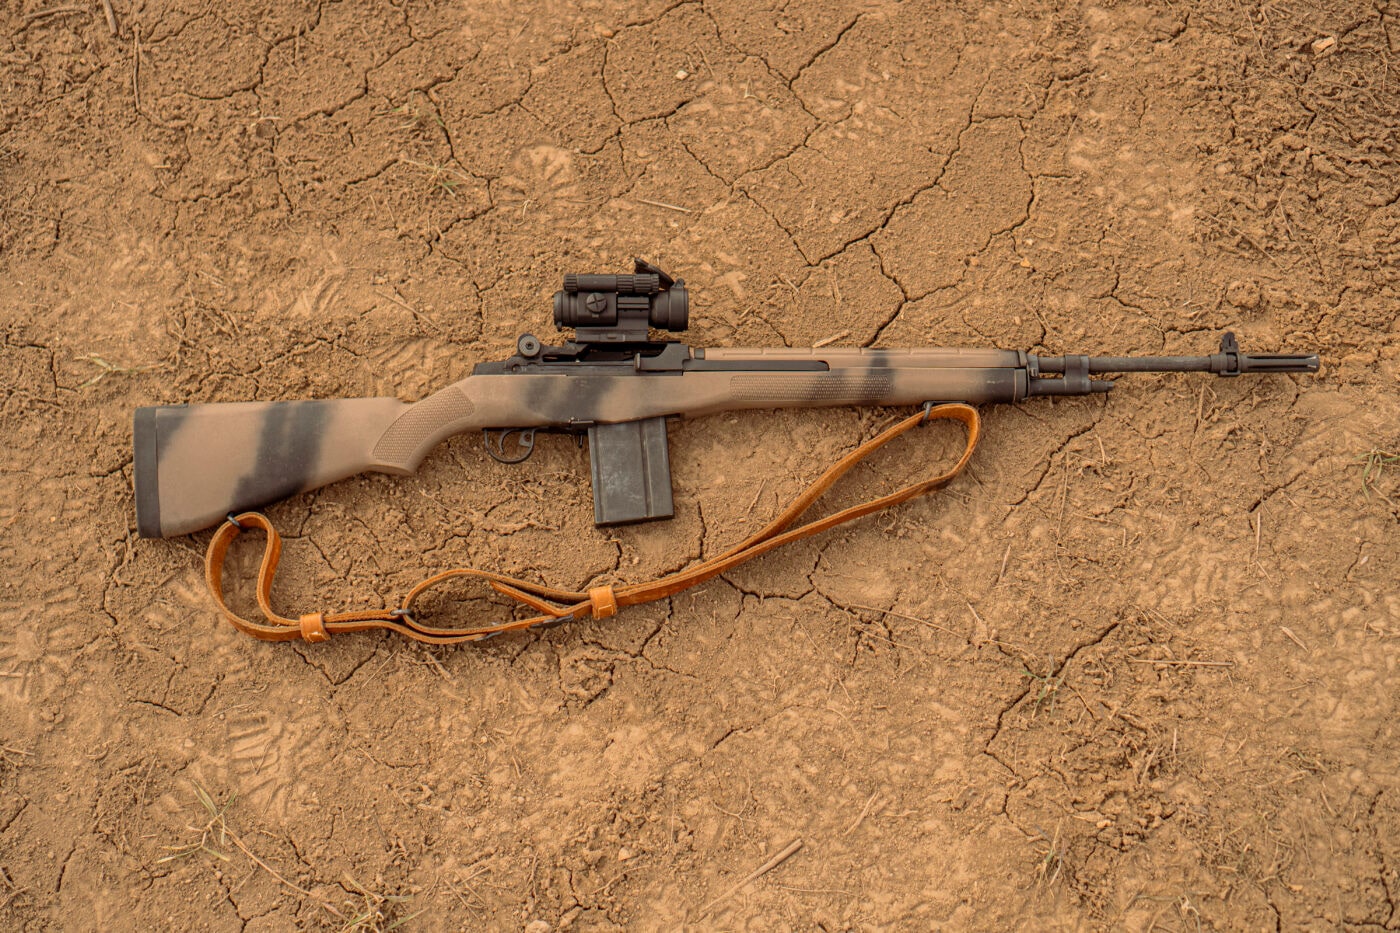 M1A rifle customized to look like the M14 from the movie Black Hawk Down